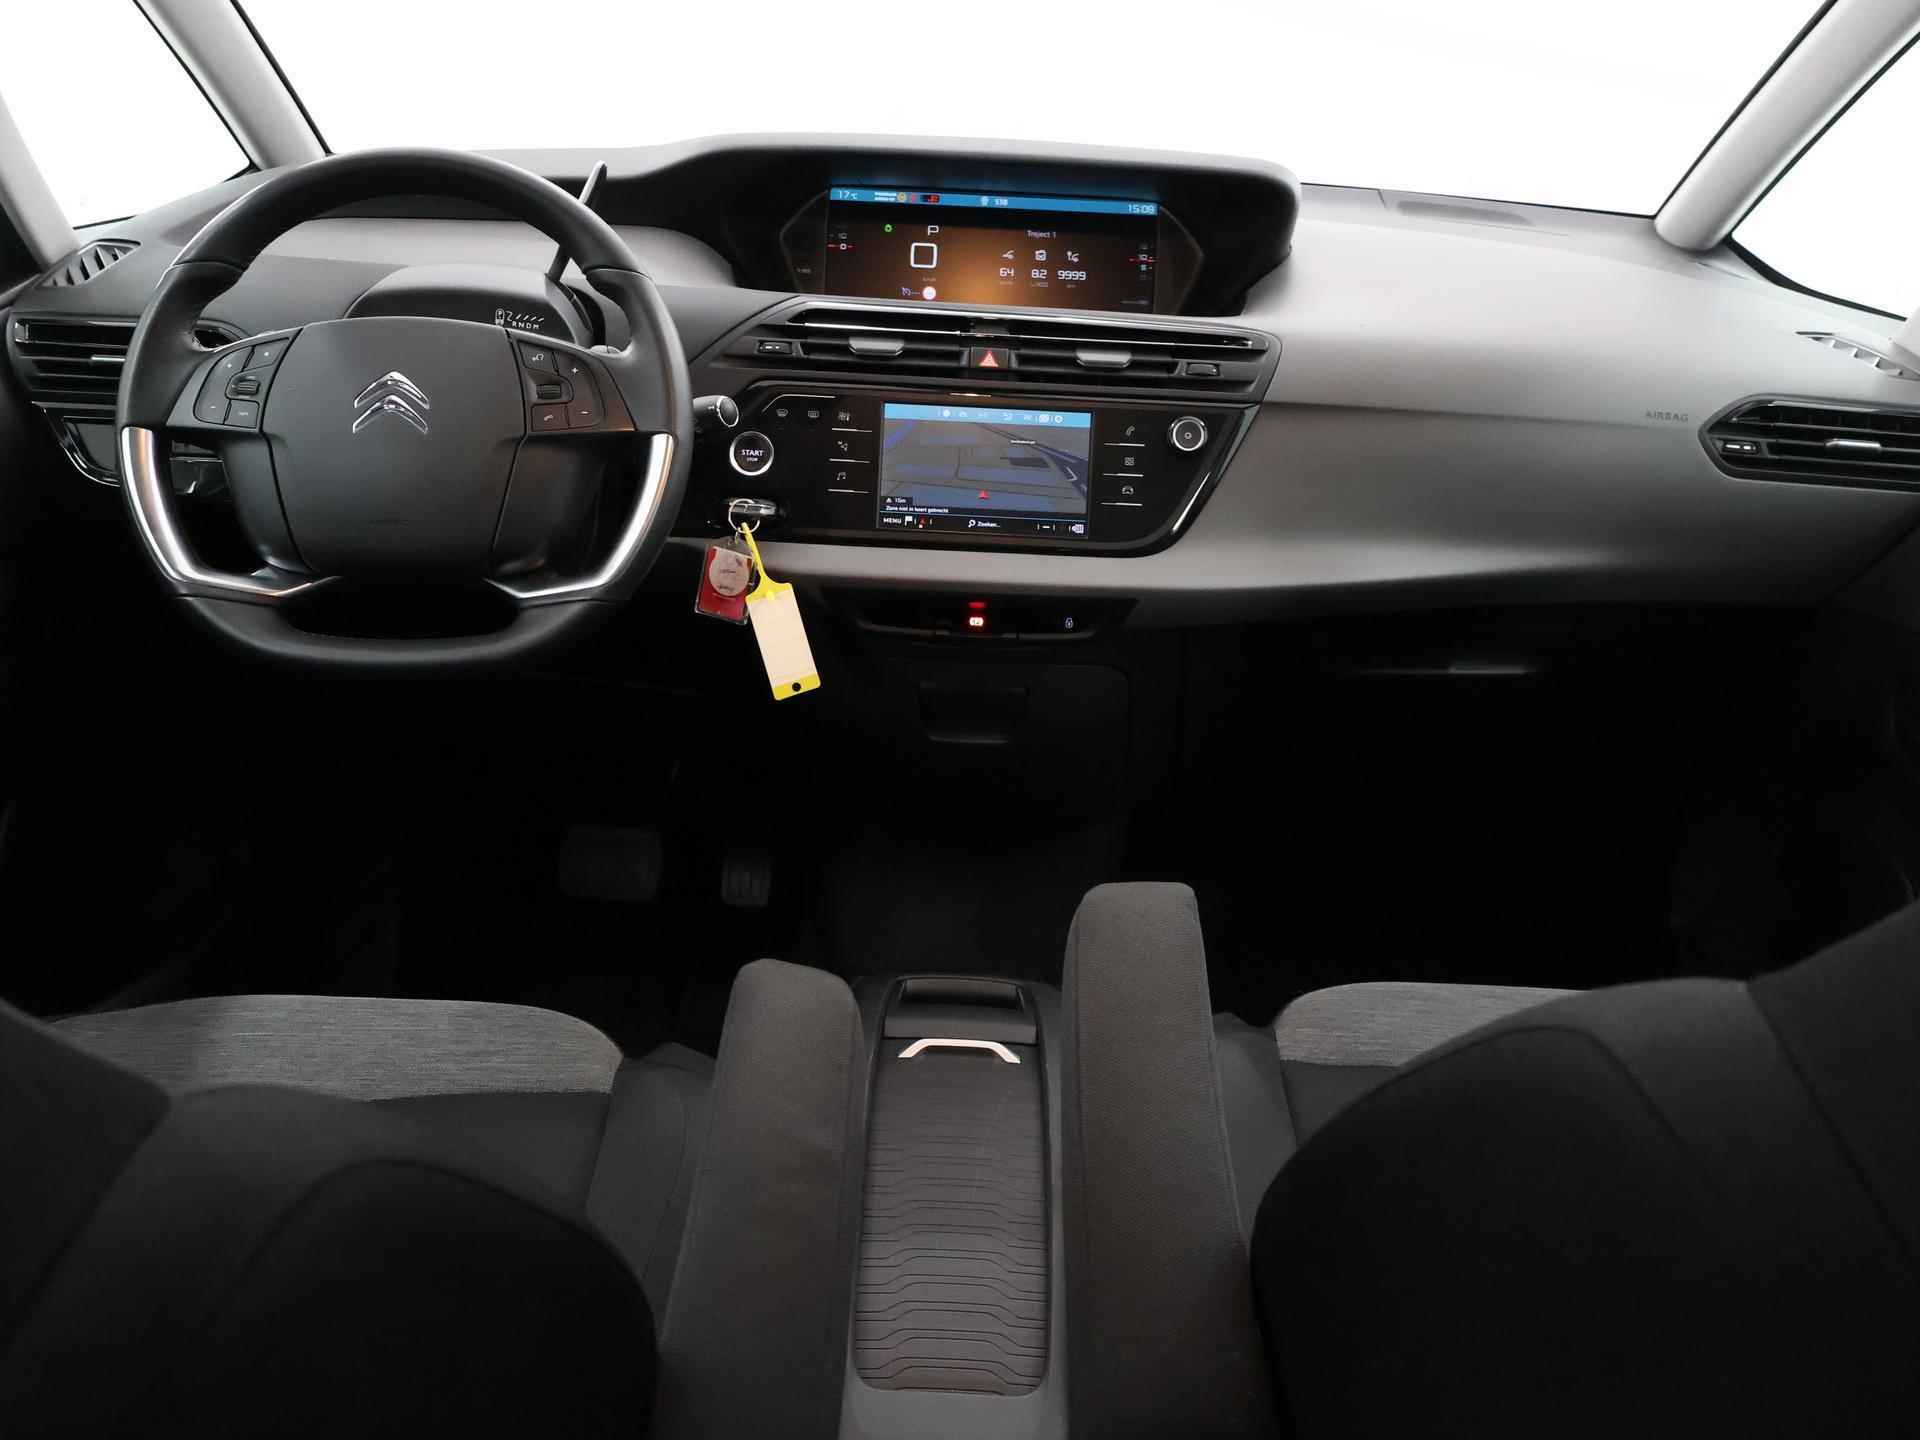 Citroen Grand C4 SpaceTourer 1.2 PureTech Business | 7 Persoons | Automaat | Navigatiesysteem | Achteruitrijcamera | Cruise Control | Climate Control | Apple Carplay/Android Auto | - 9/36